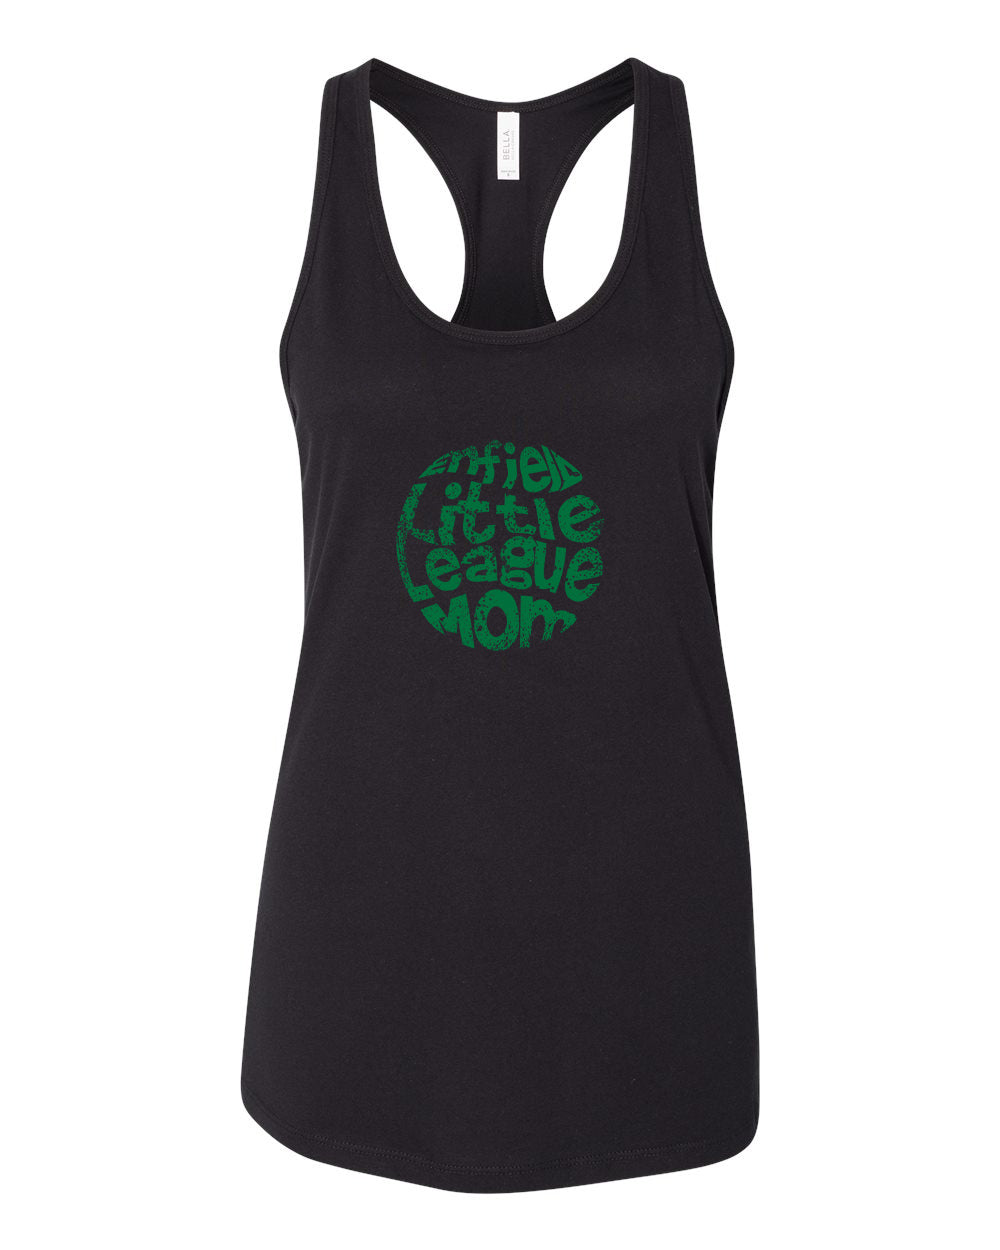 ELL Ladies Tank Top "MOM" - 6008 (color options available)